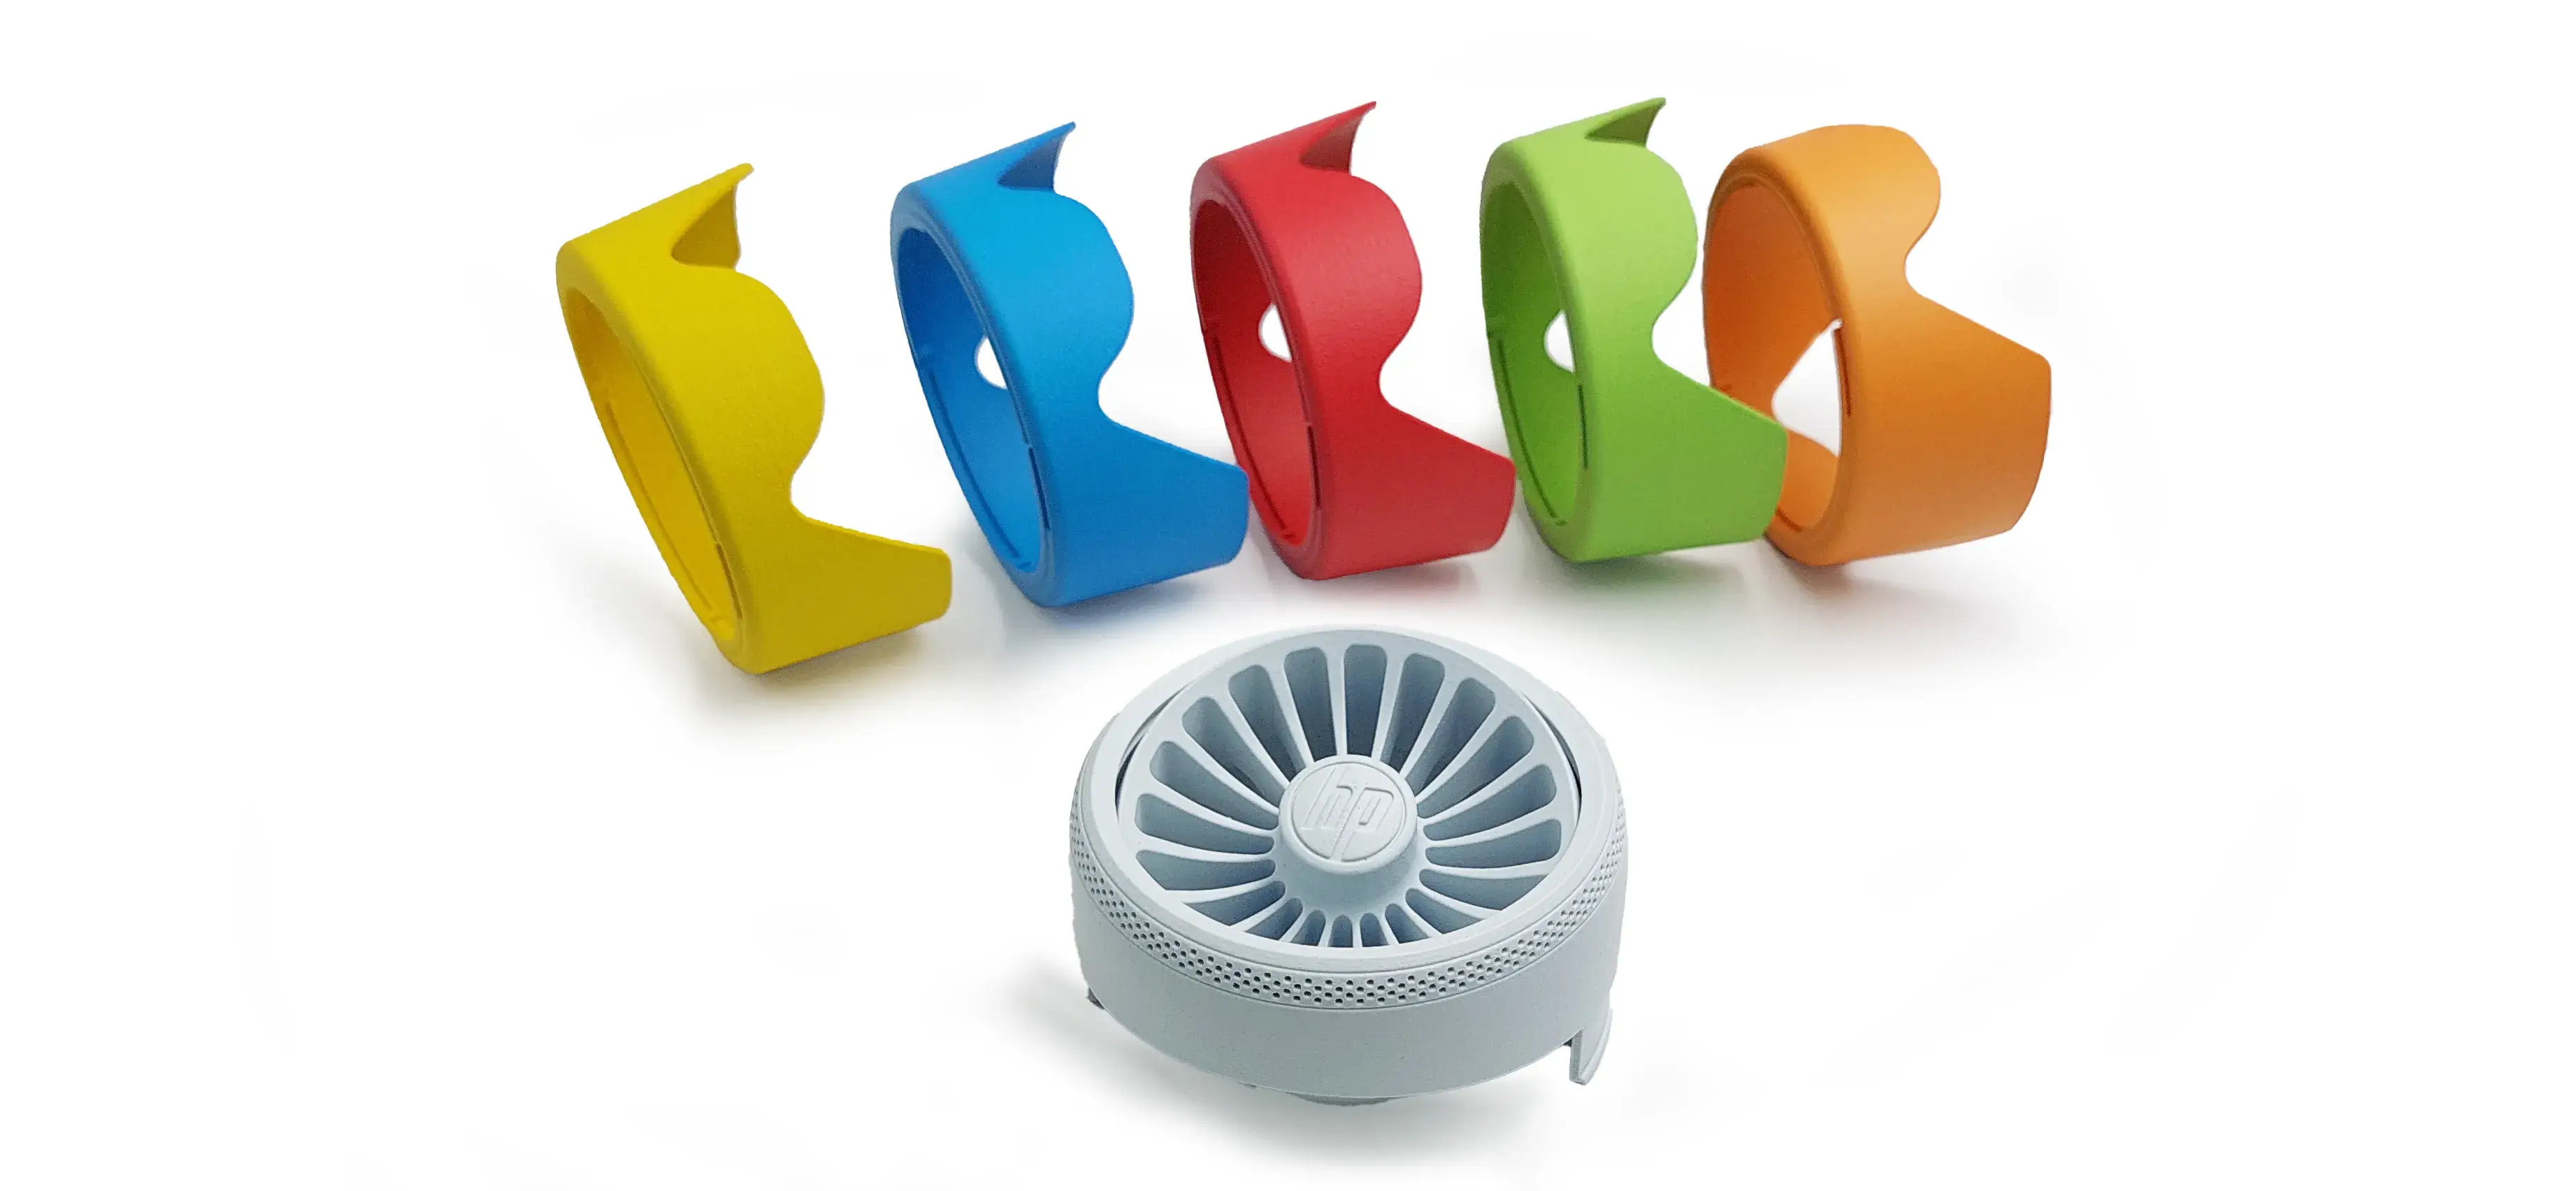 3D printed fan in white with yellow, blue, red, green and orange covers